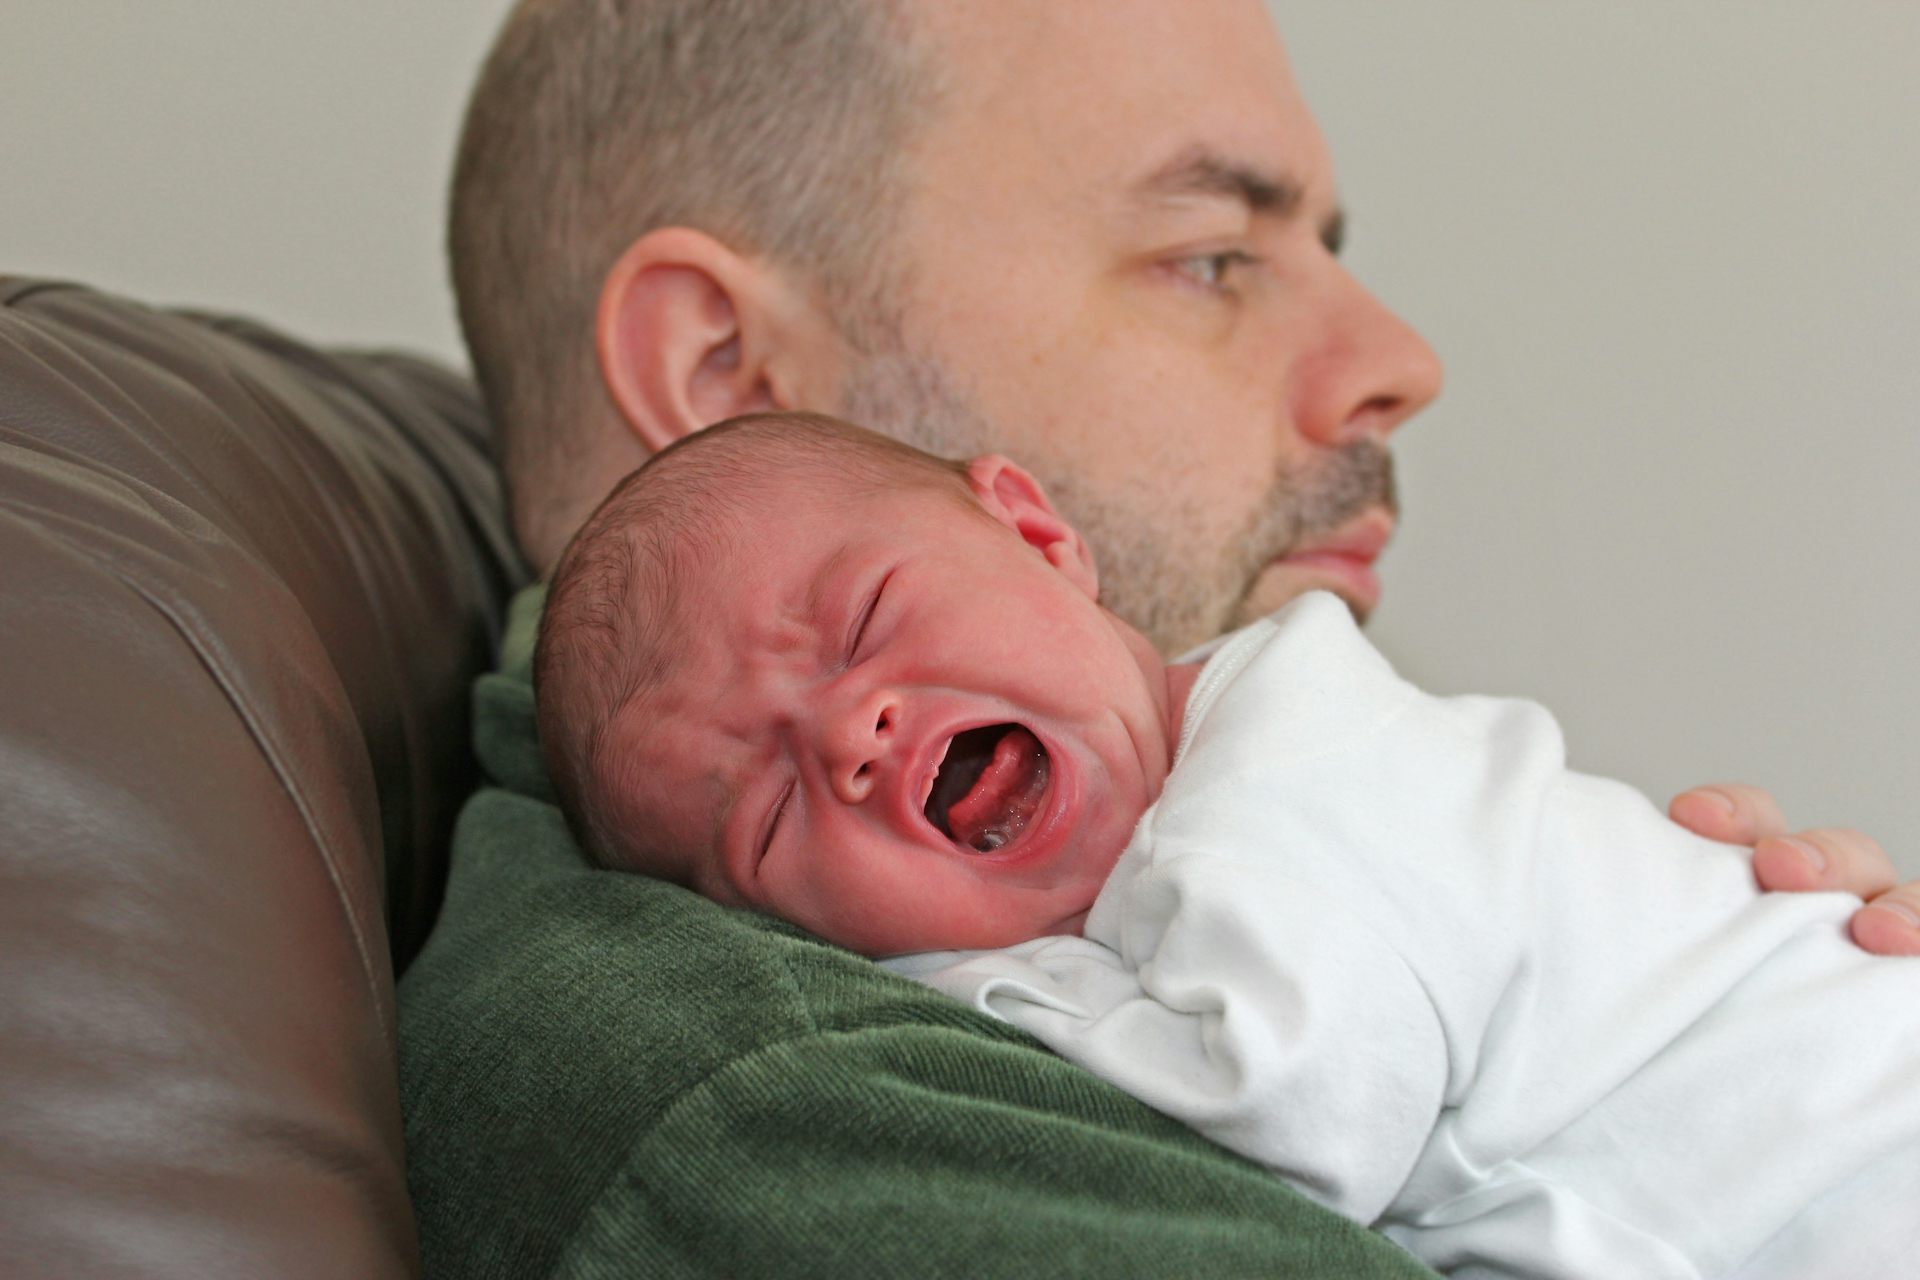 things to do for colic babies